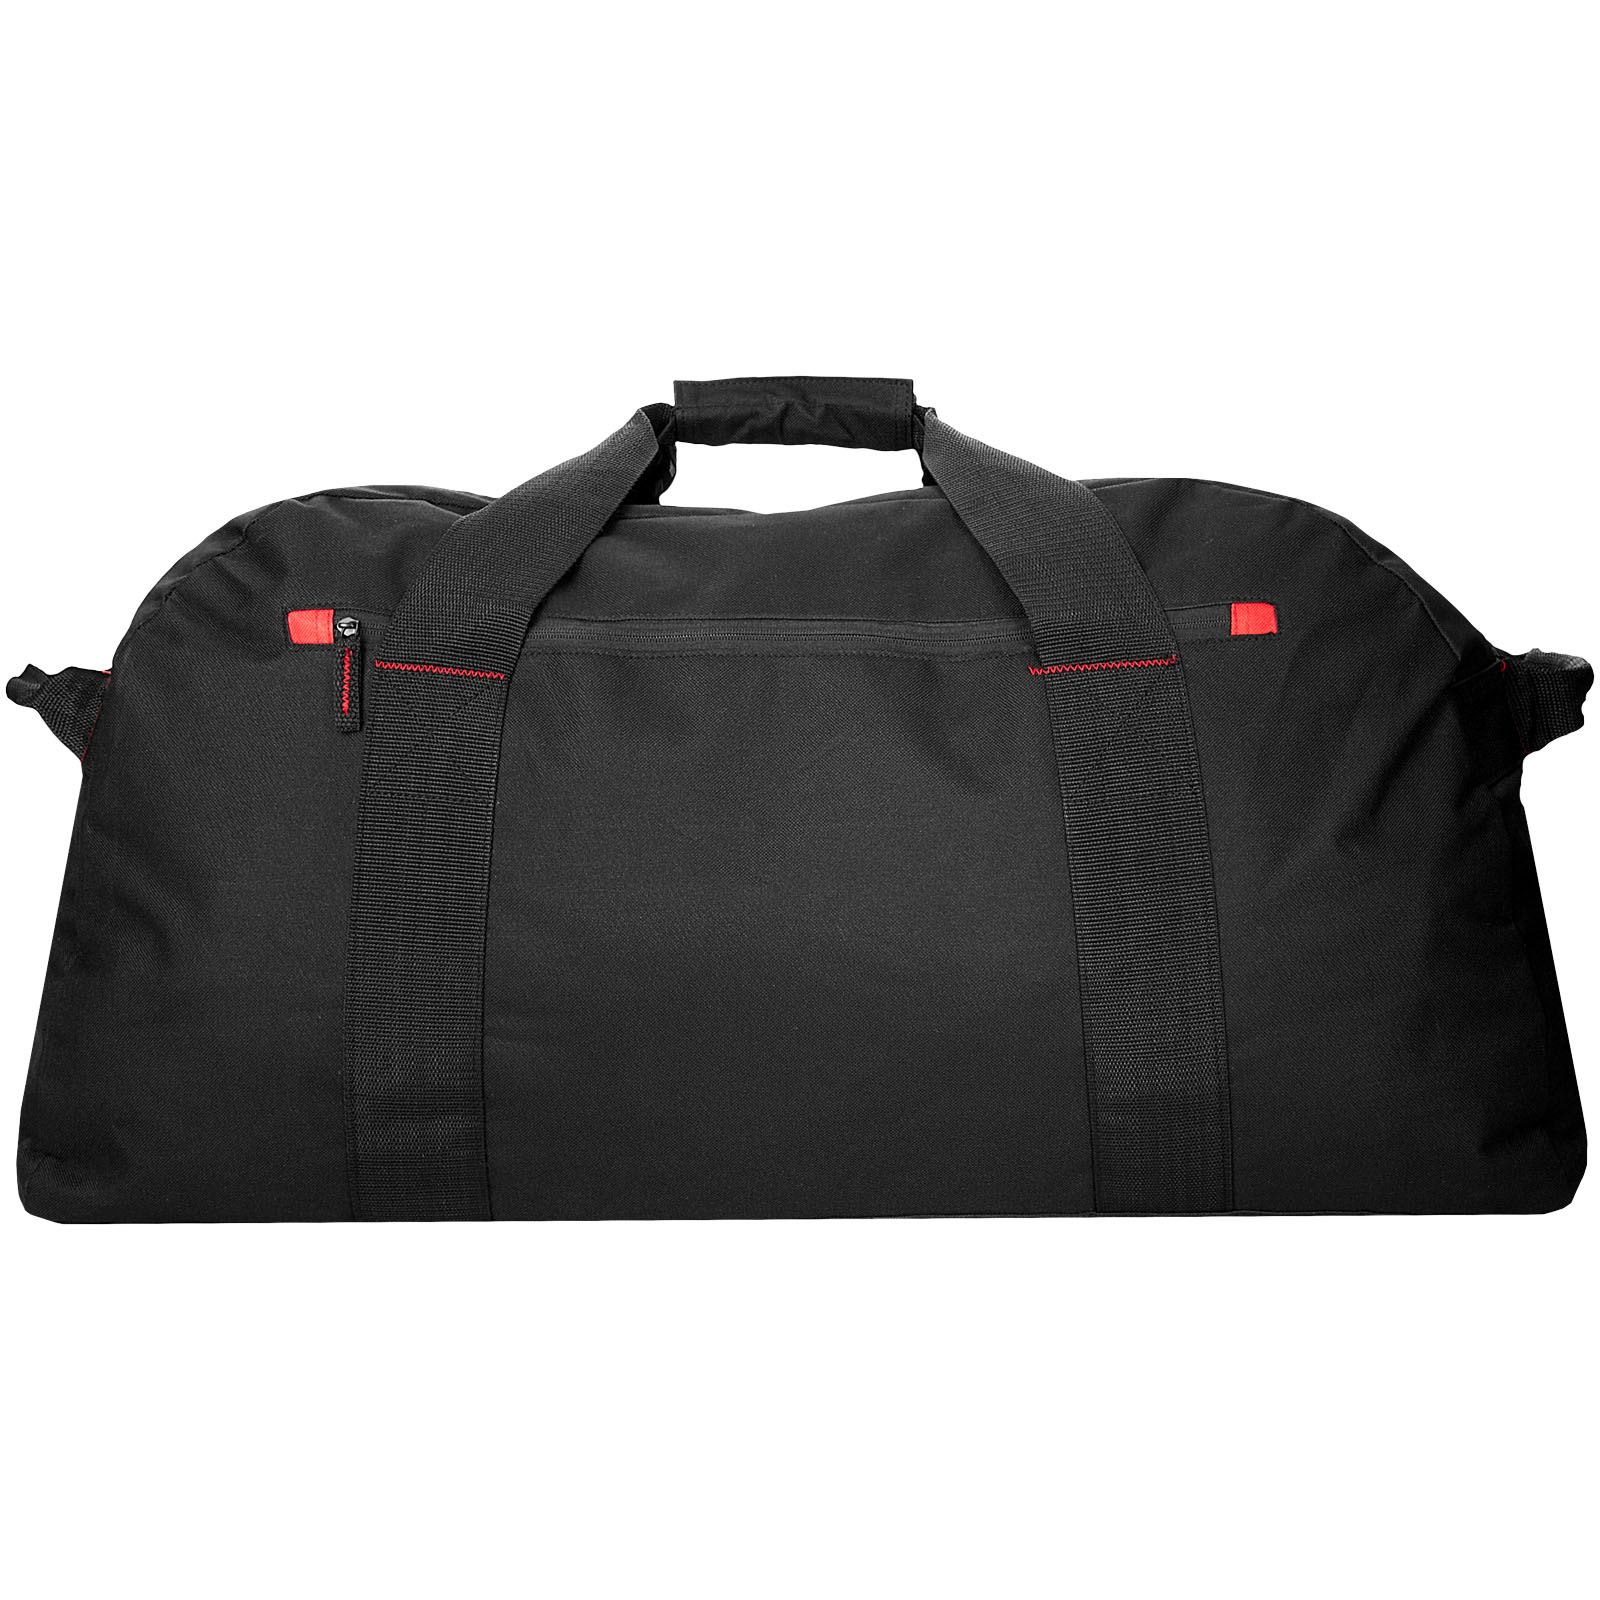 Advertising Sport & Gym bags - Vancouver extra large travel duffel bag 75L - 1